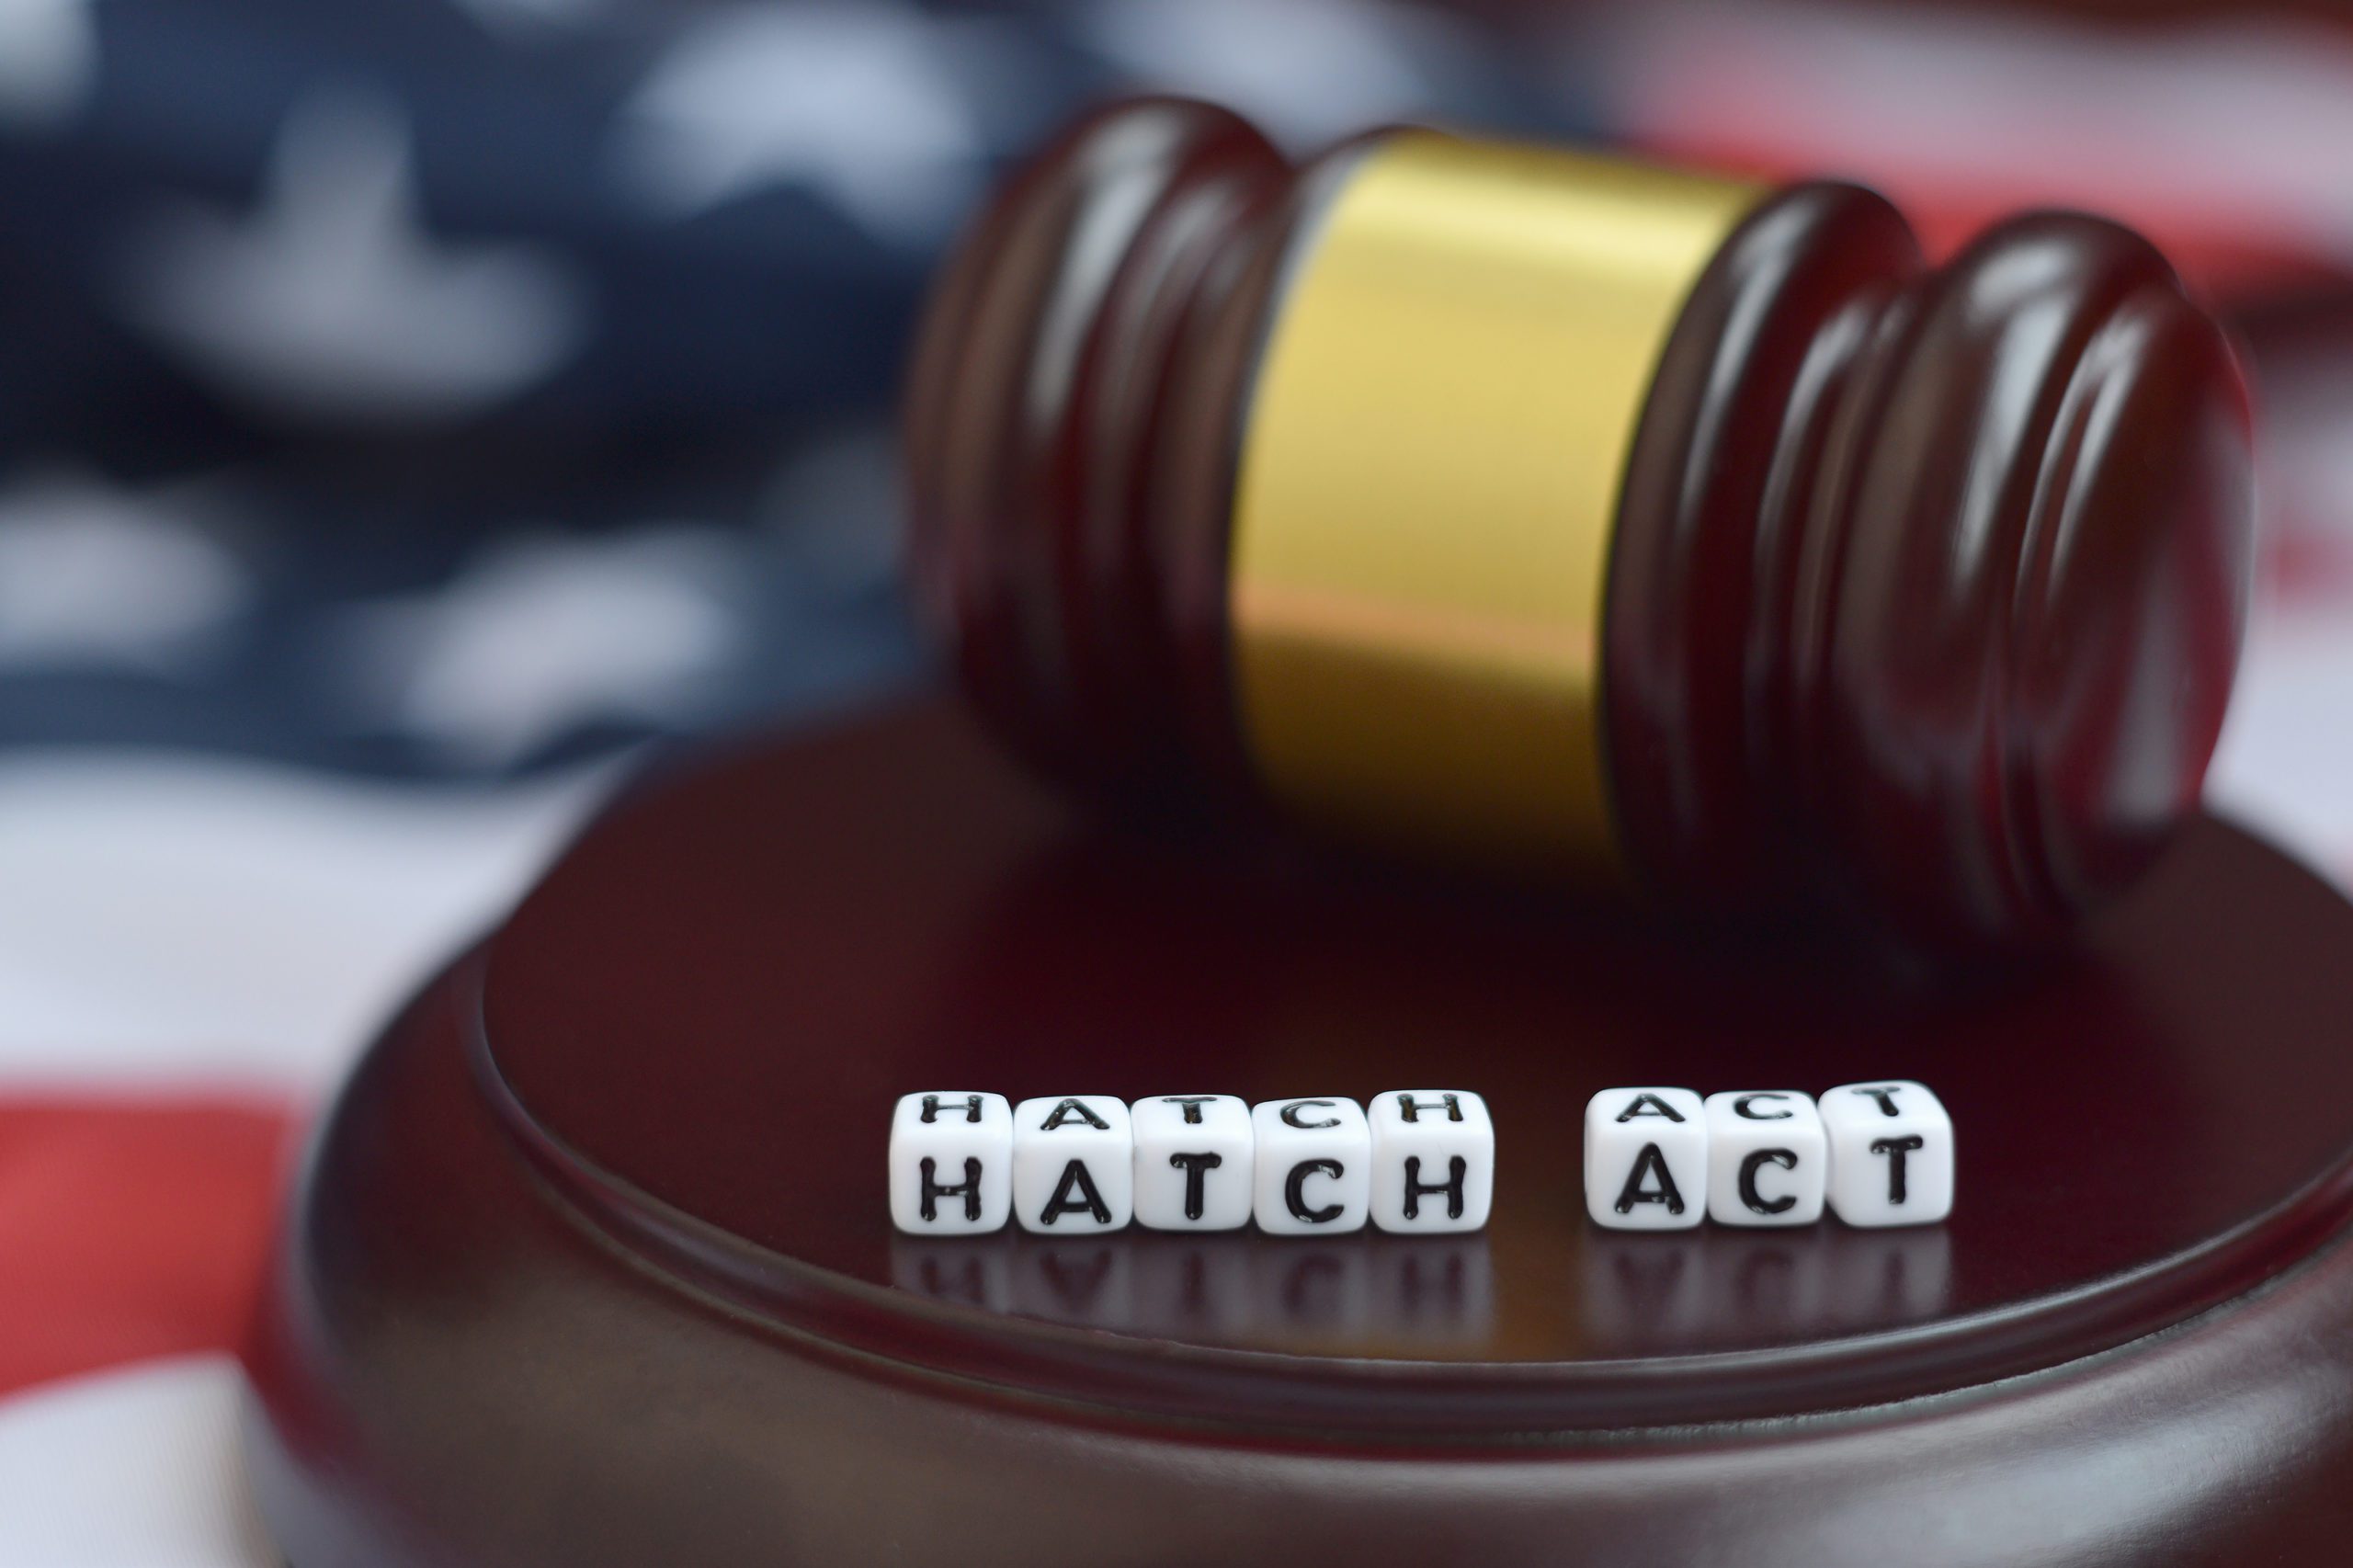 What Political Activities Are Prohibited By The Hatch Act?